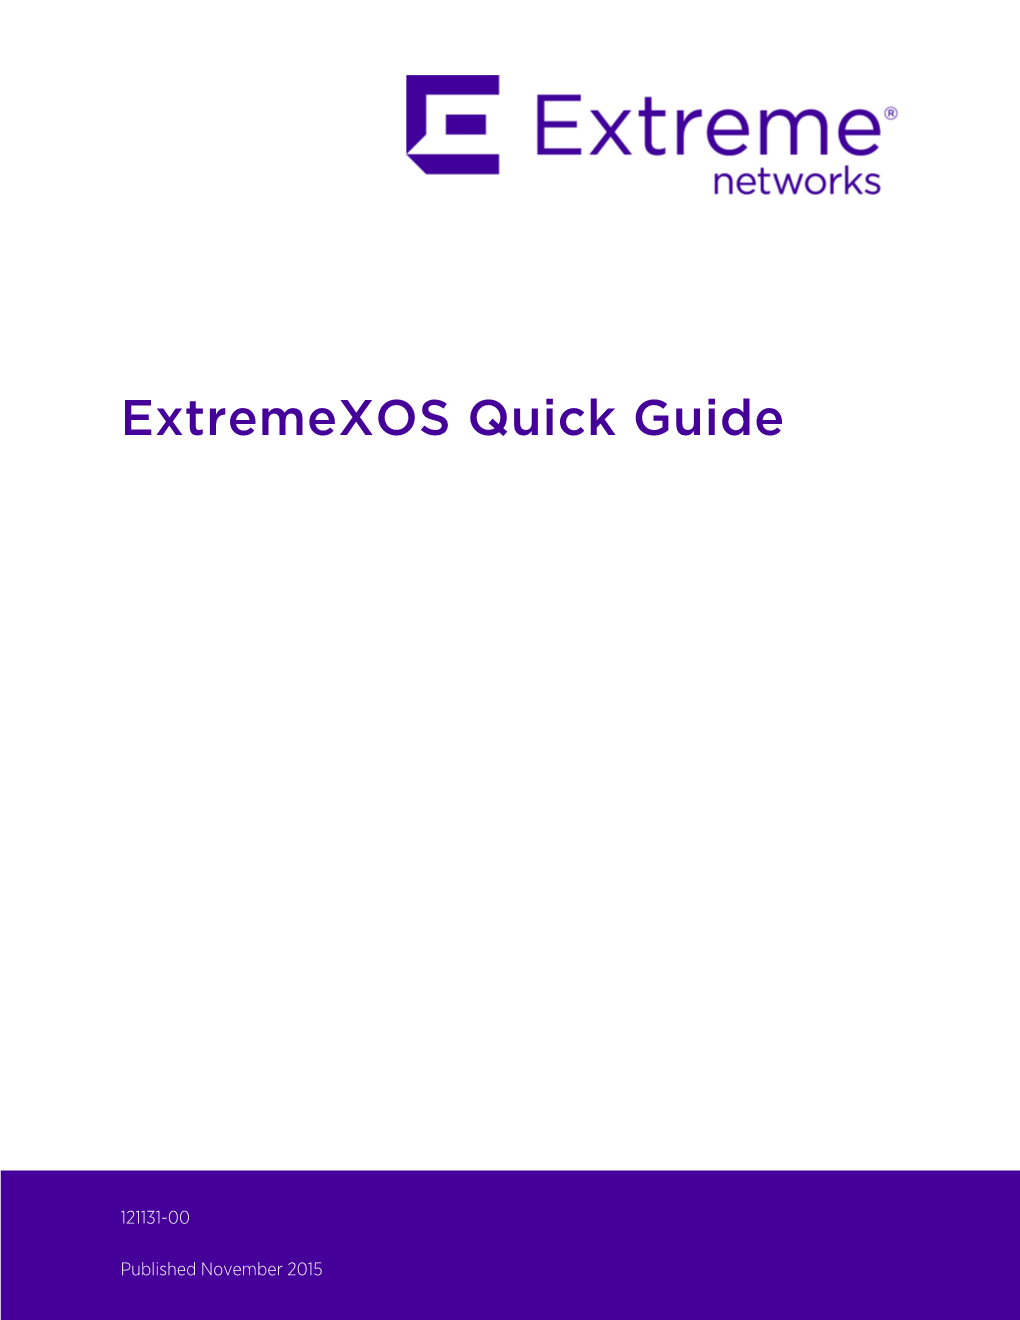 Extremexos Quick Guide